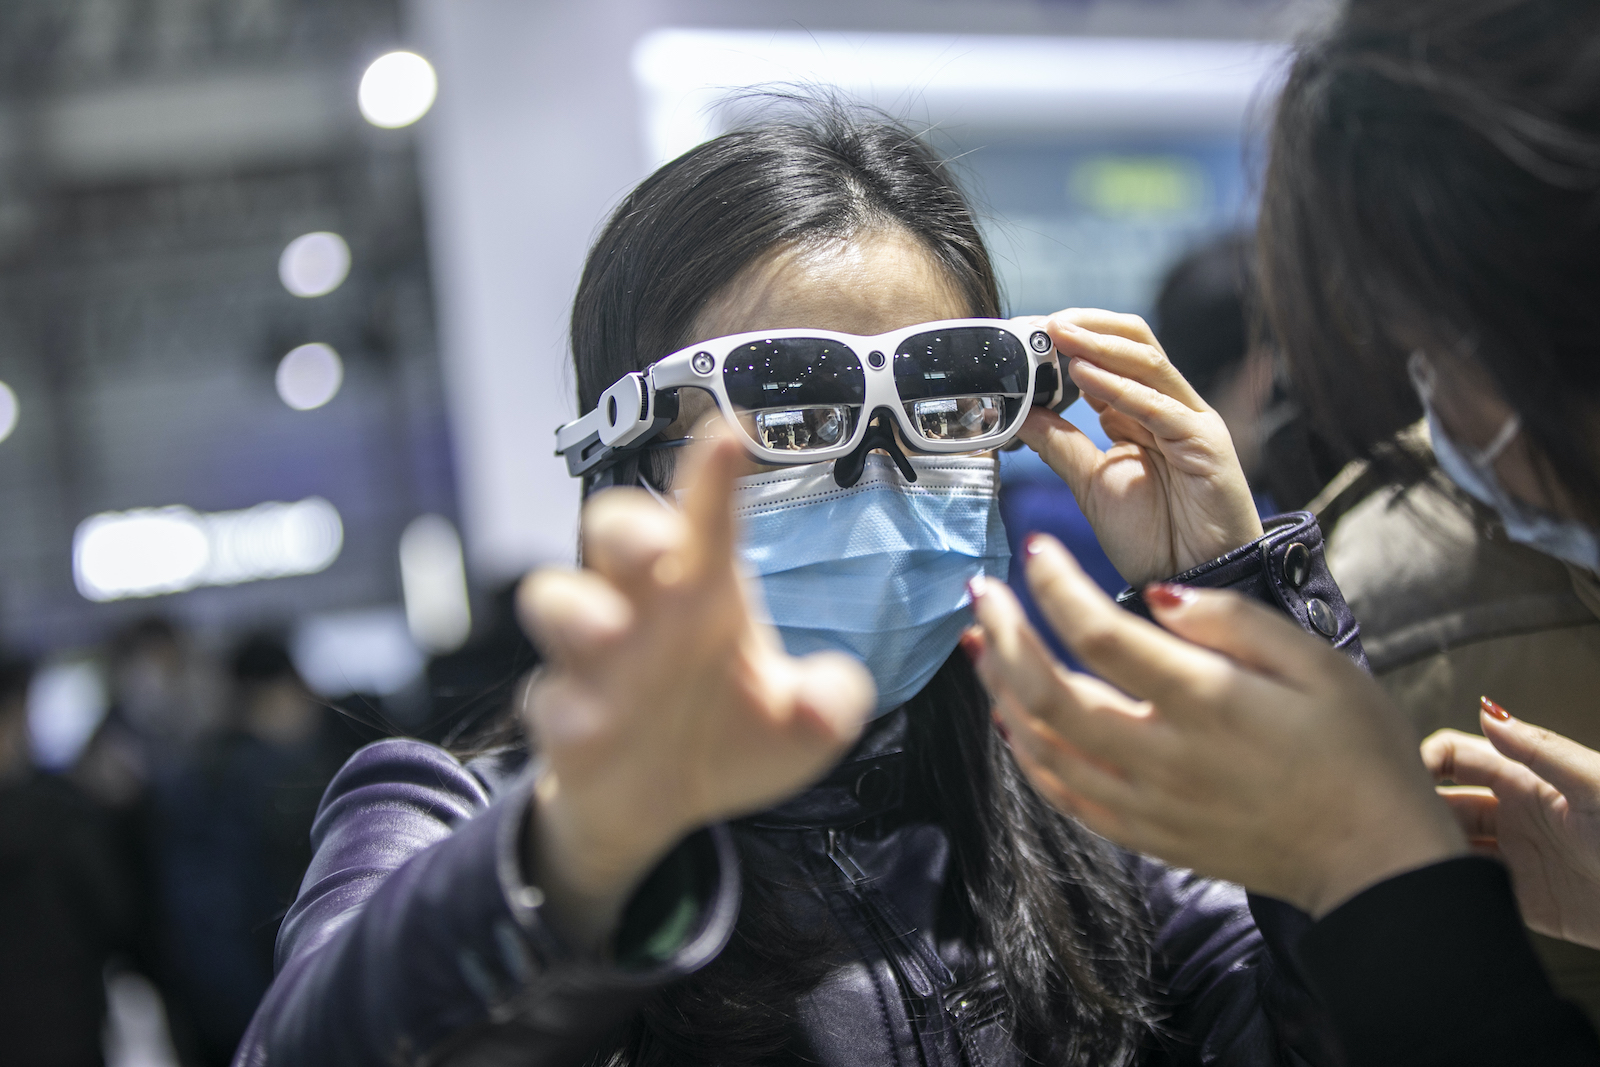 SHANGHAI, CHINA - FEBRUARY 24: A visitor tries out a pair of augmented reality (AR) glasses at the Qualcomm booth during the Mobile World Congress (NWC) Shanghai 2021 at Shanghai New International Expo Center on February 24, 2021 in Shanghai, China. (Photo VCG/VCG via Getty Images)